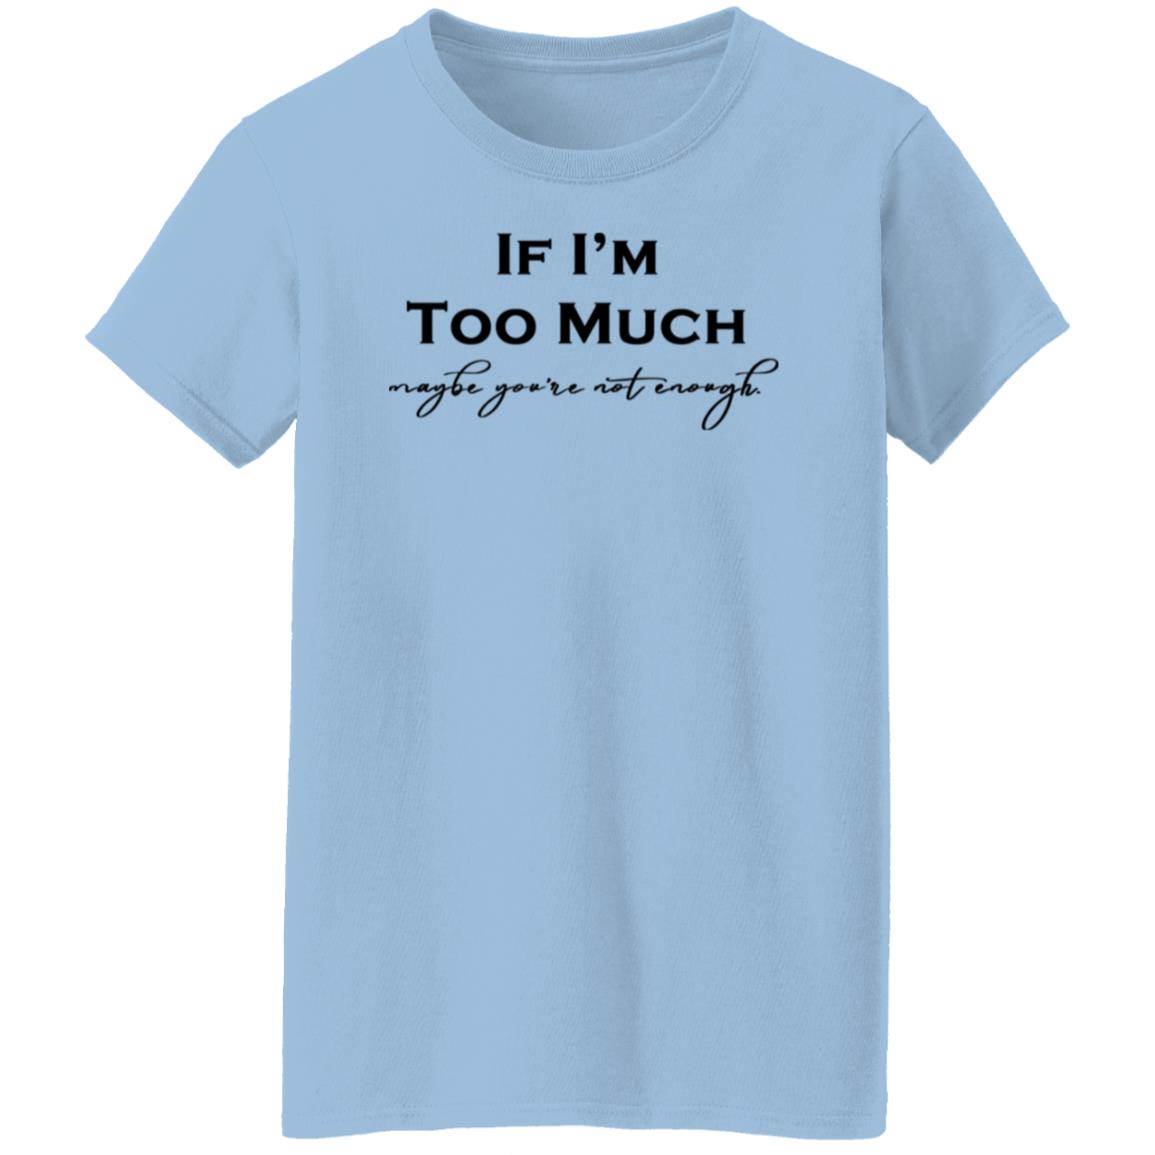 If I'm Too Much T-Shirt